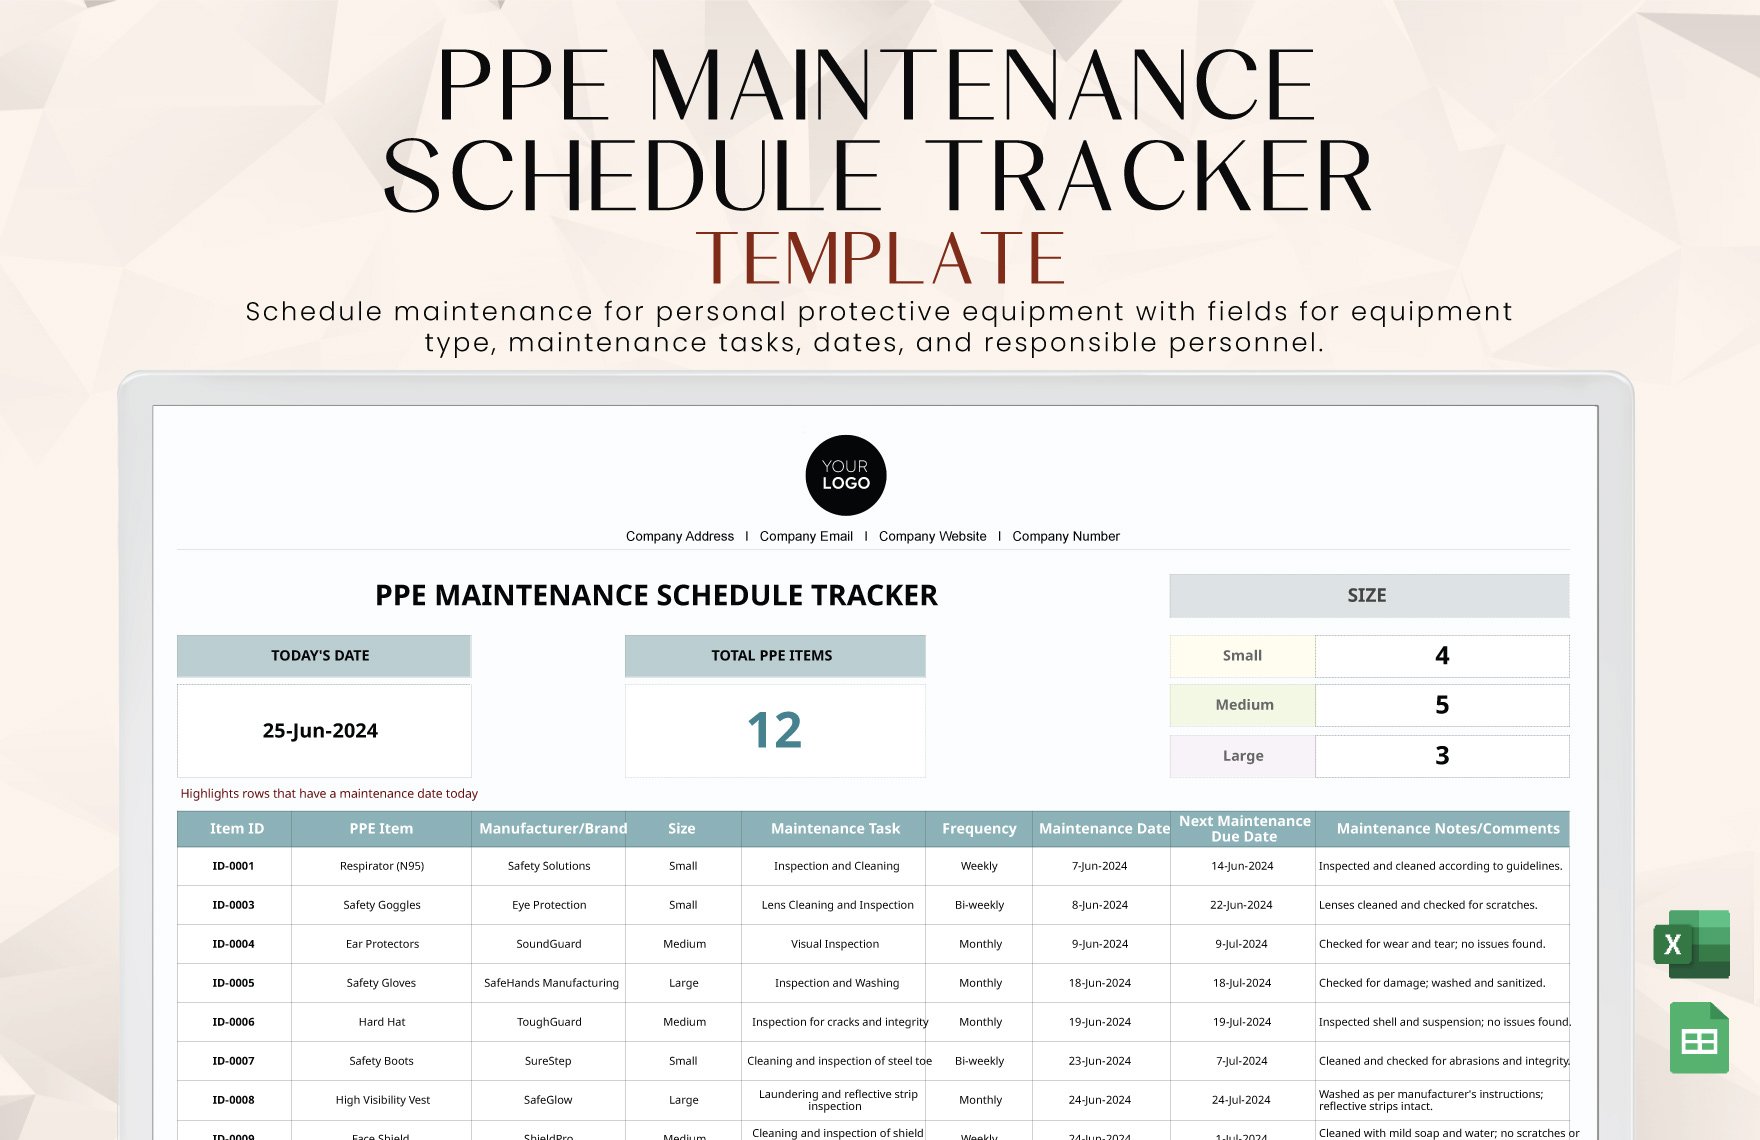 PPE Maintenance Schedule Tracker Template in Excel, Google Sheets